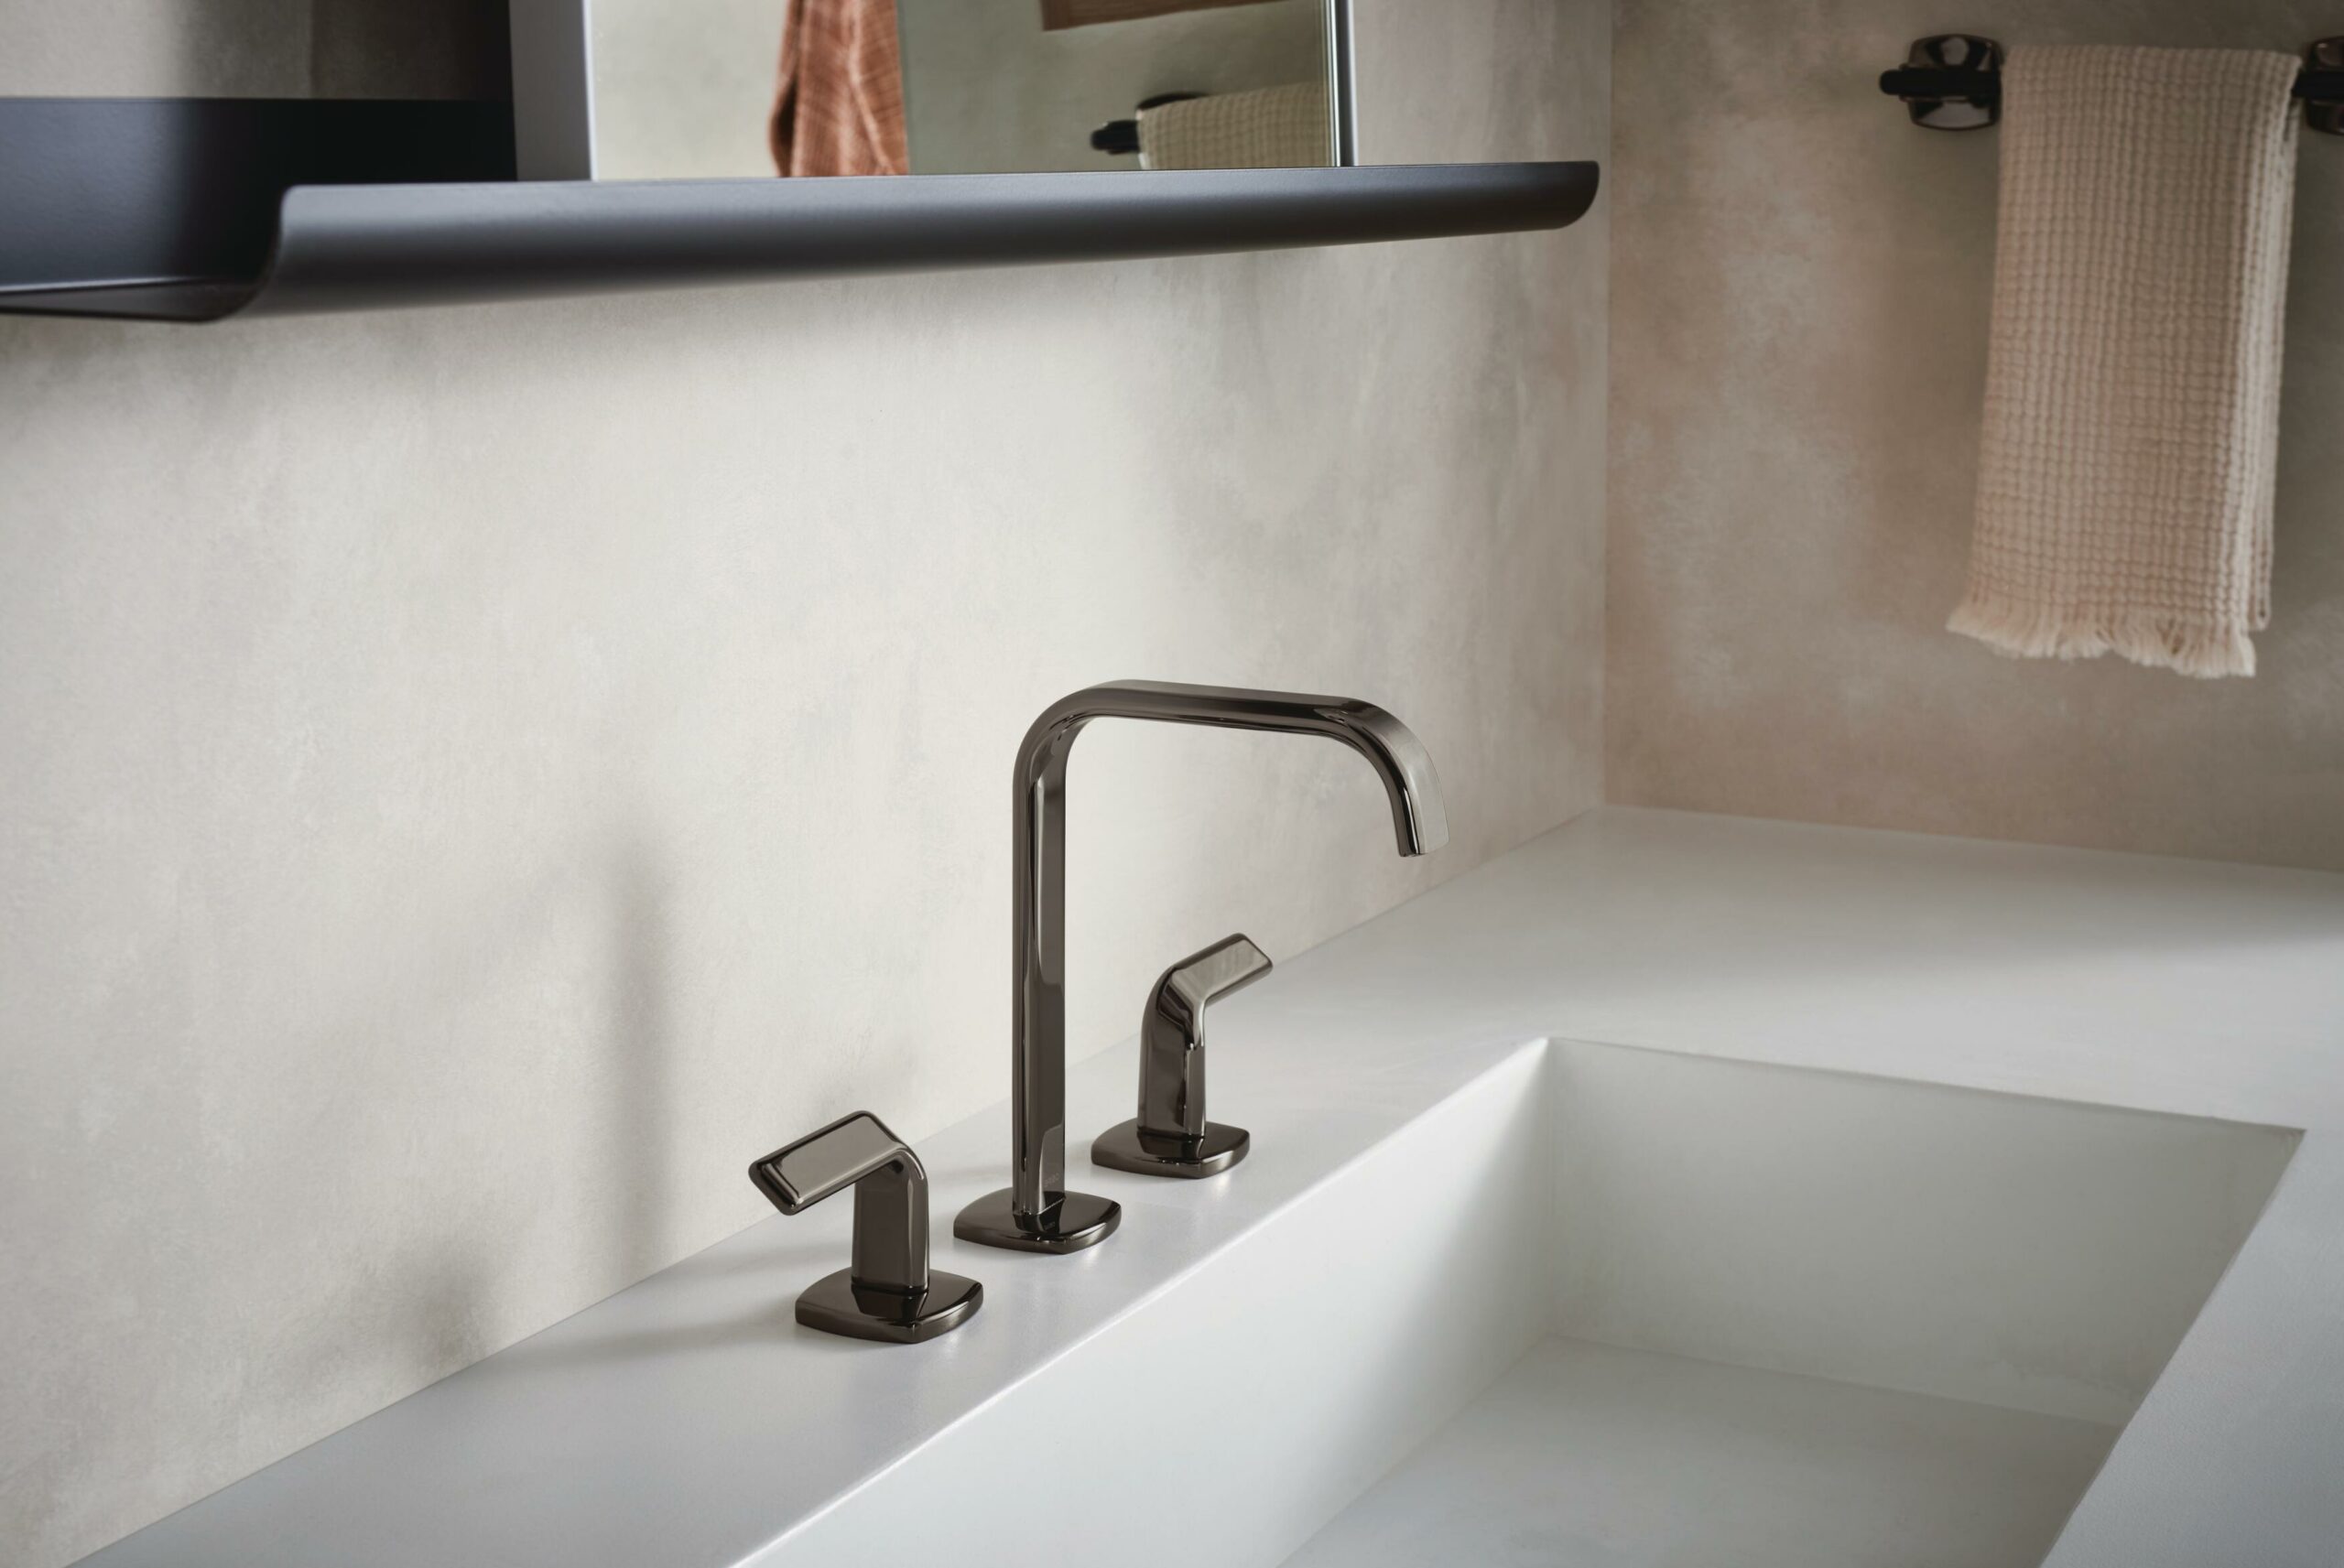 Sunken bathroom sink with a brilliant black finish on the Allaria faucet from Brizo